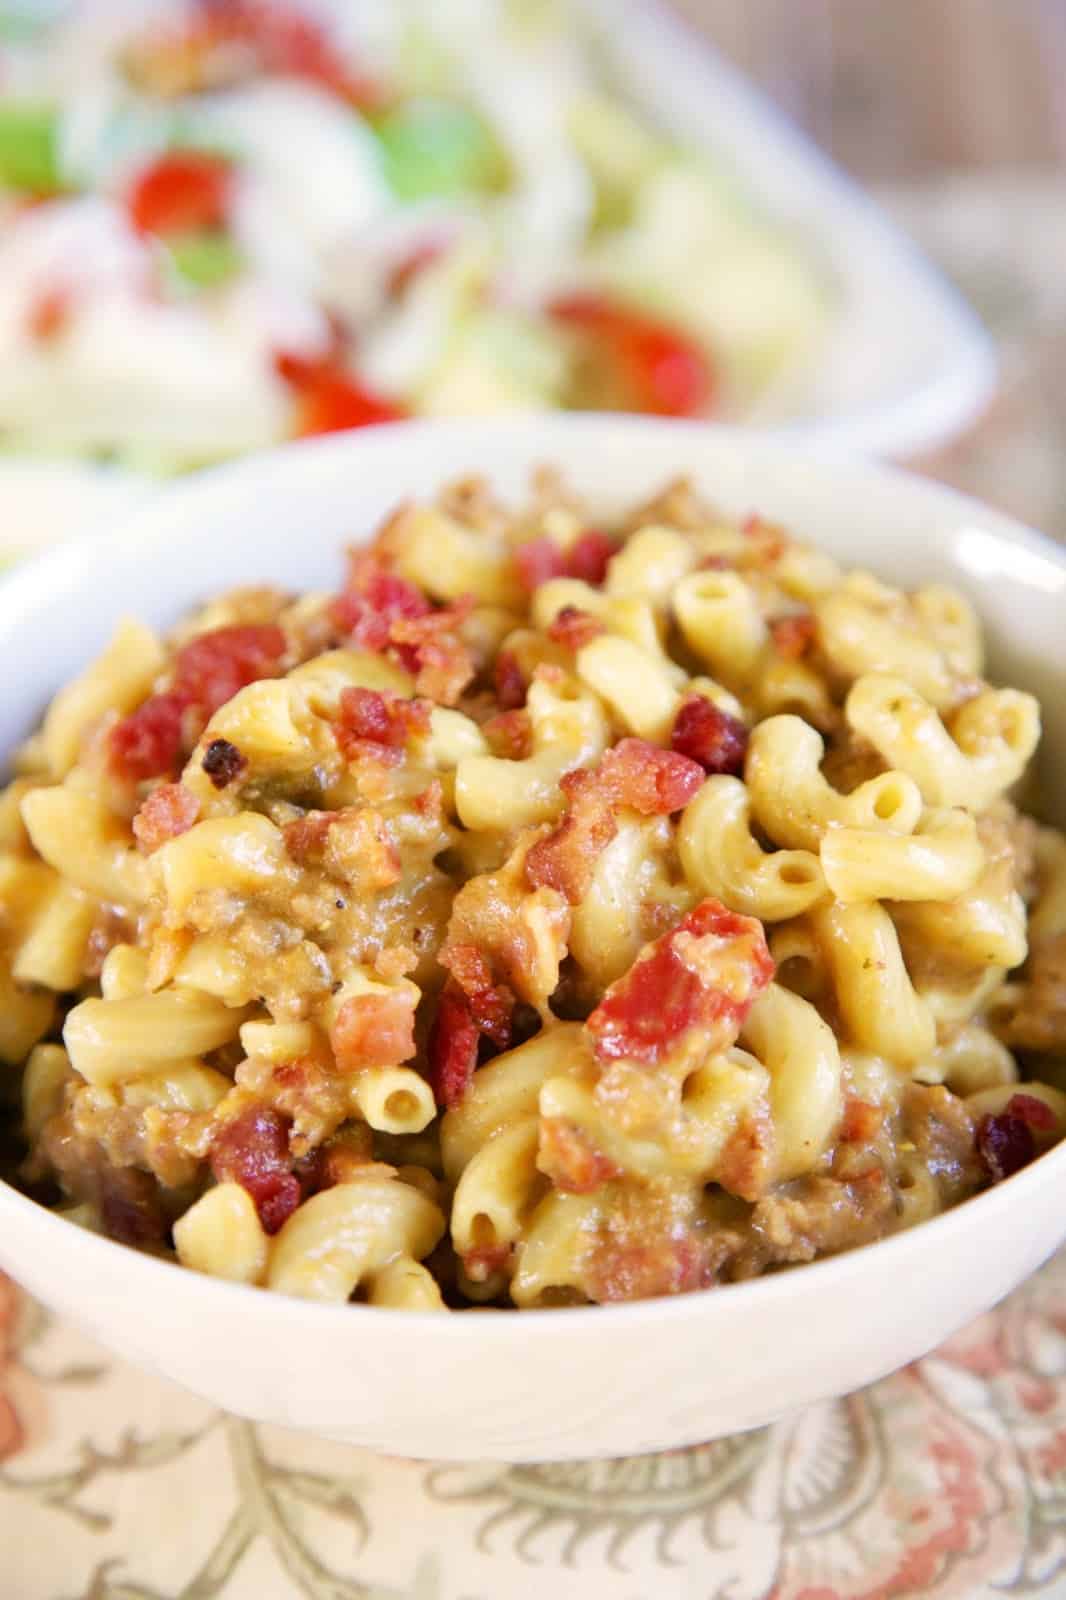 Slow Cooker Bacon Cheeseburger Pasta - FREEZER MEAL - just toss everything in a freezer bag for a quick meal later. Ground beef, bacon, onion, dry mustard, cream of chicken soup, Rotel tomatoes, beef broth, cheddar cheese and elbow macaroni. Kids go crazy over this easy slow cooker meal! No need to pre cook the ground beef or pre cook the pasta. It all cooks in the slow cooker. #slowcooker #freezermeal #groundbeef